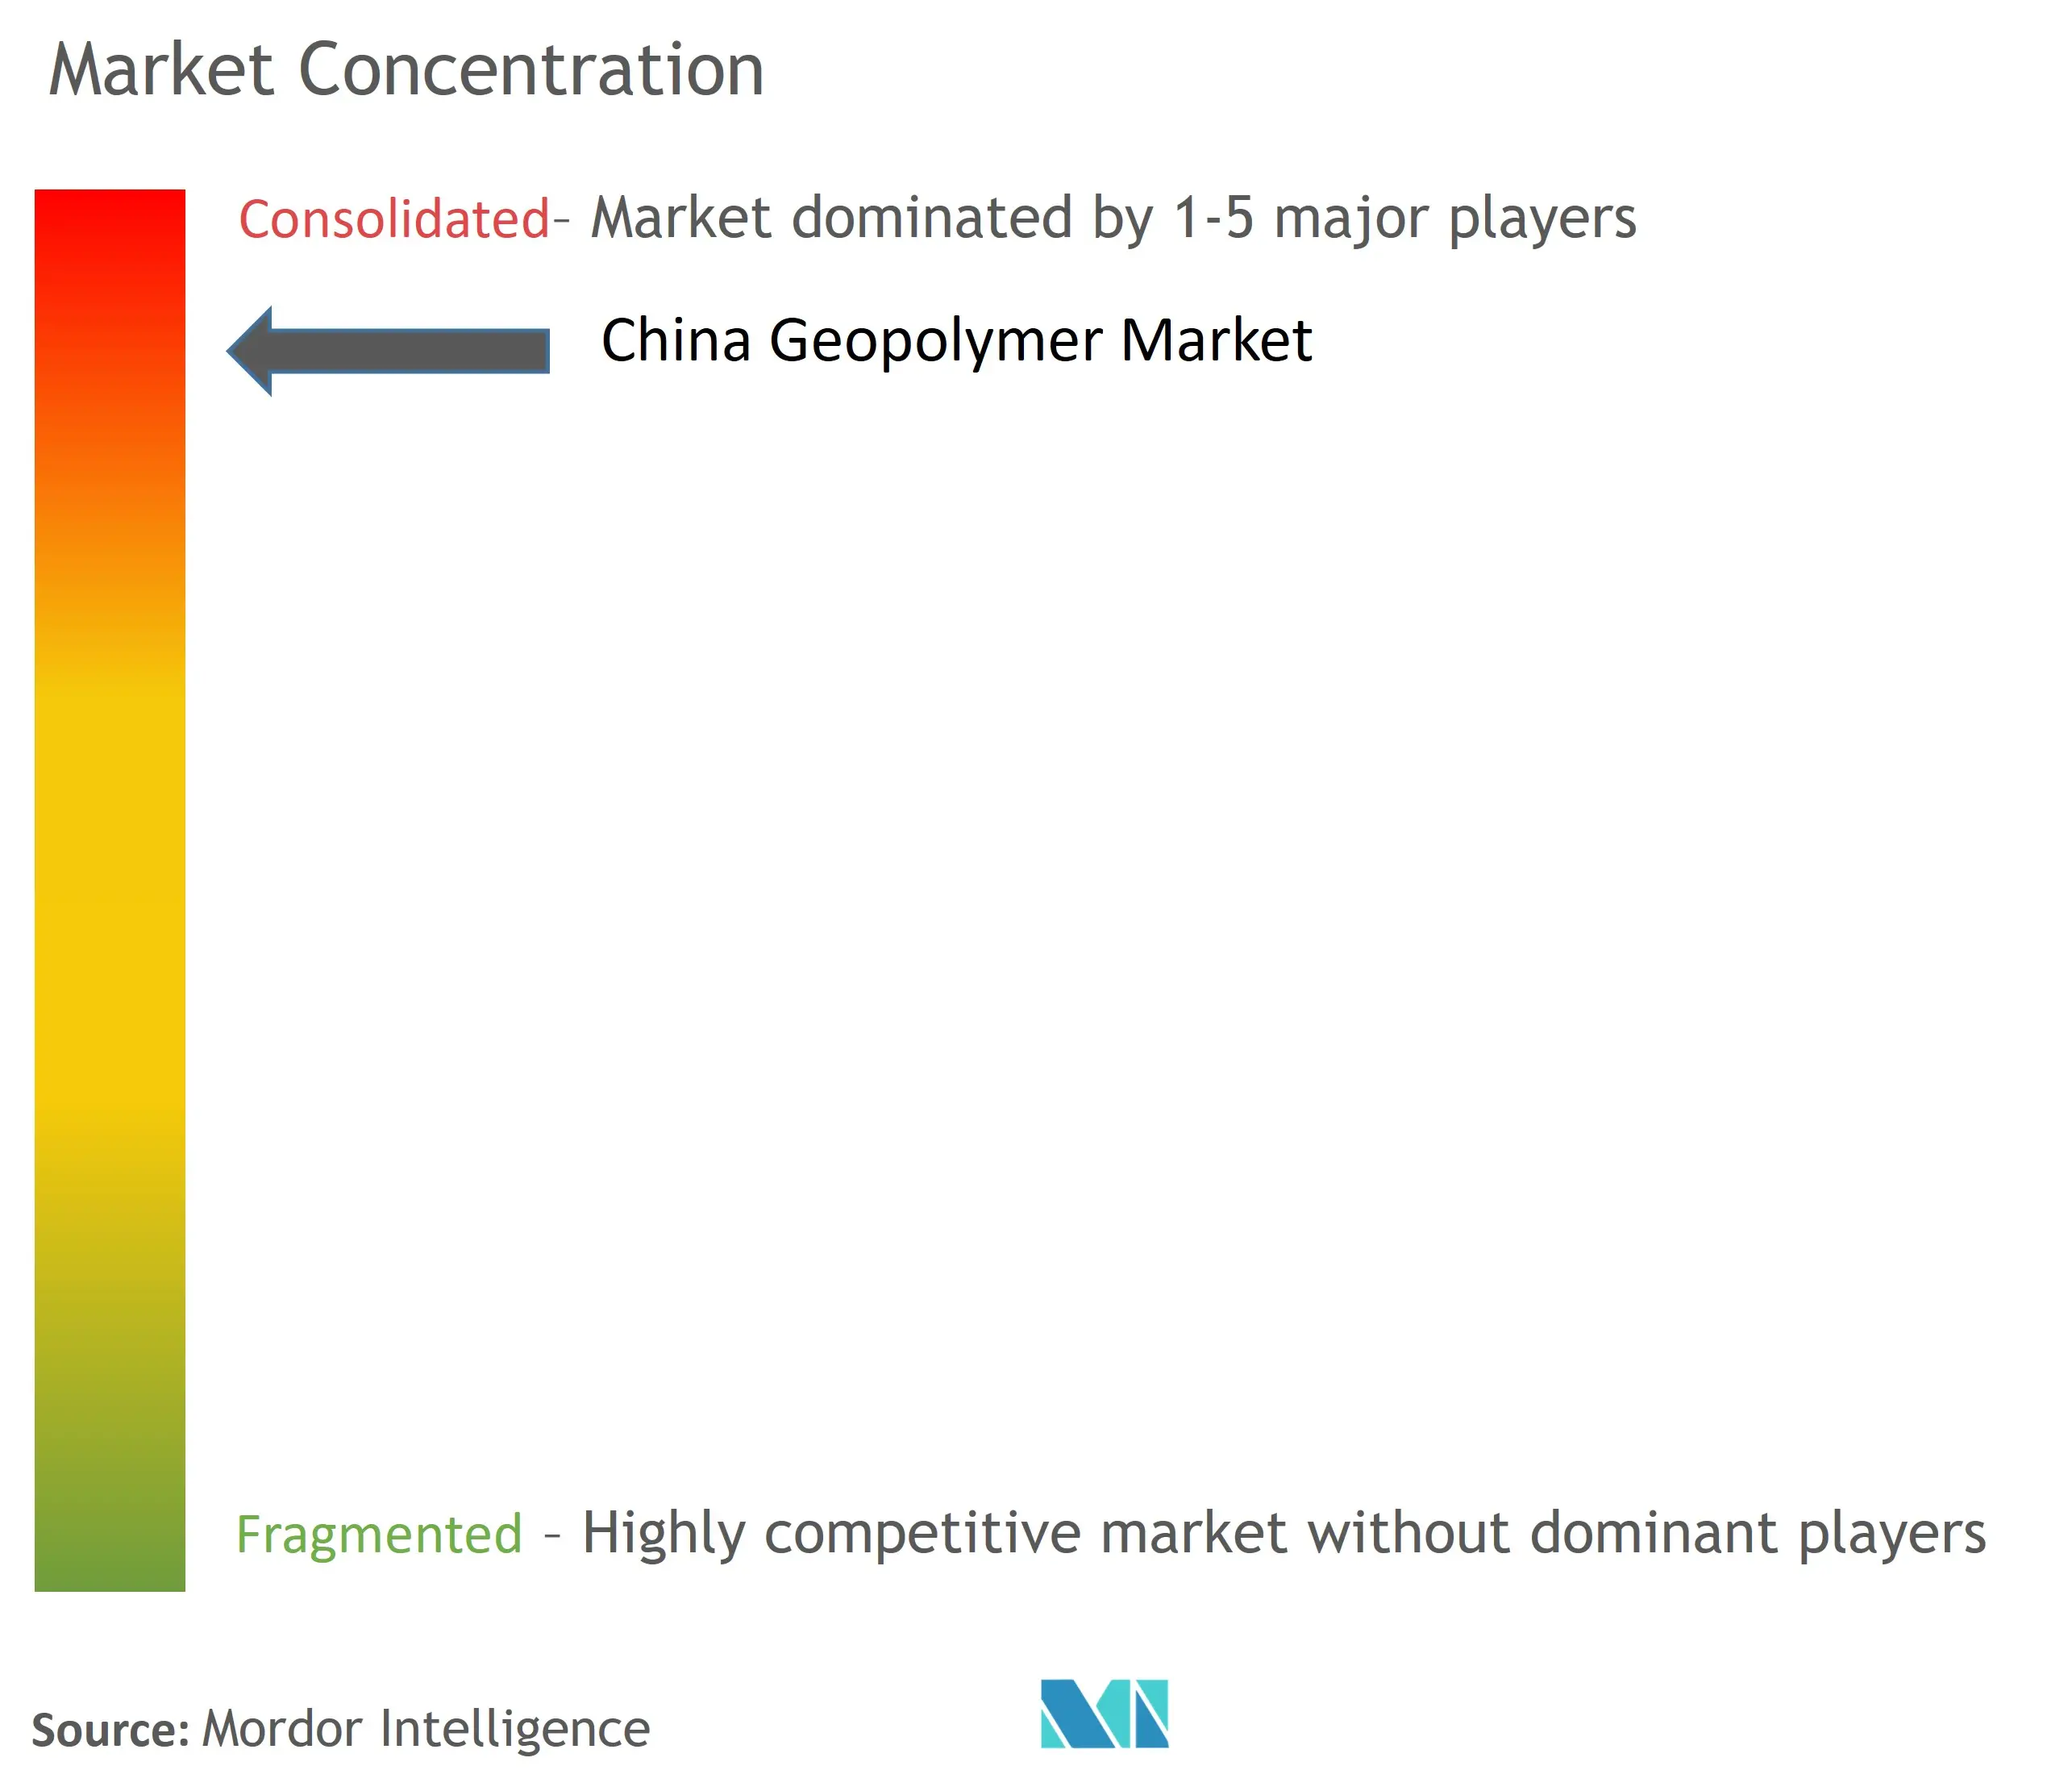 China Geopolymer Market Concentration